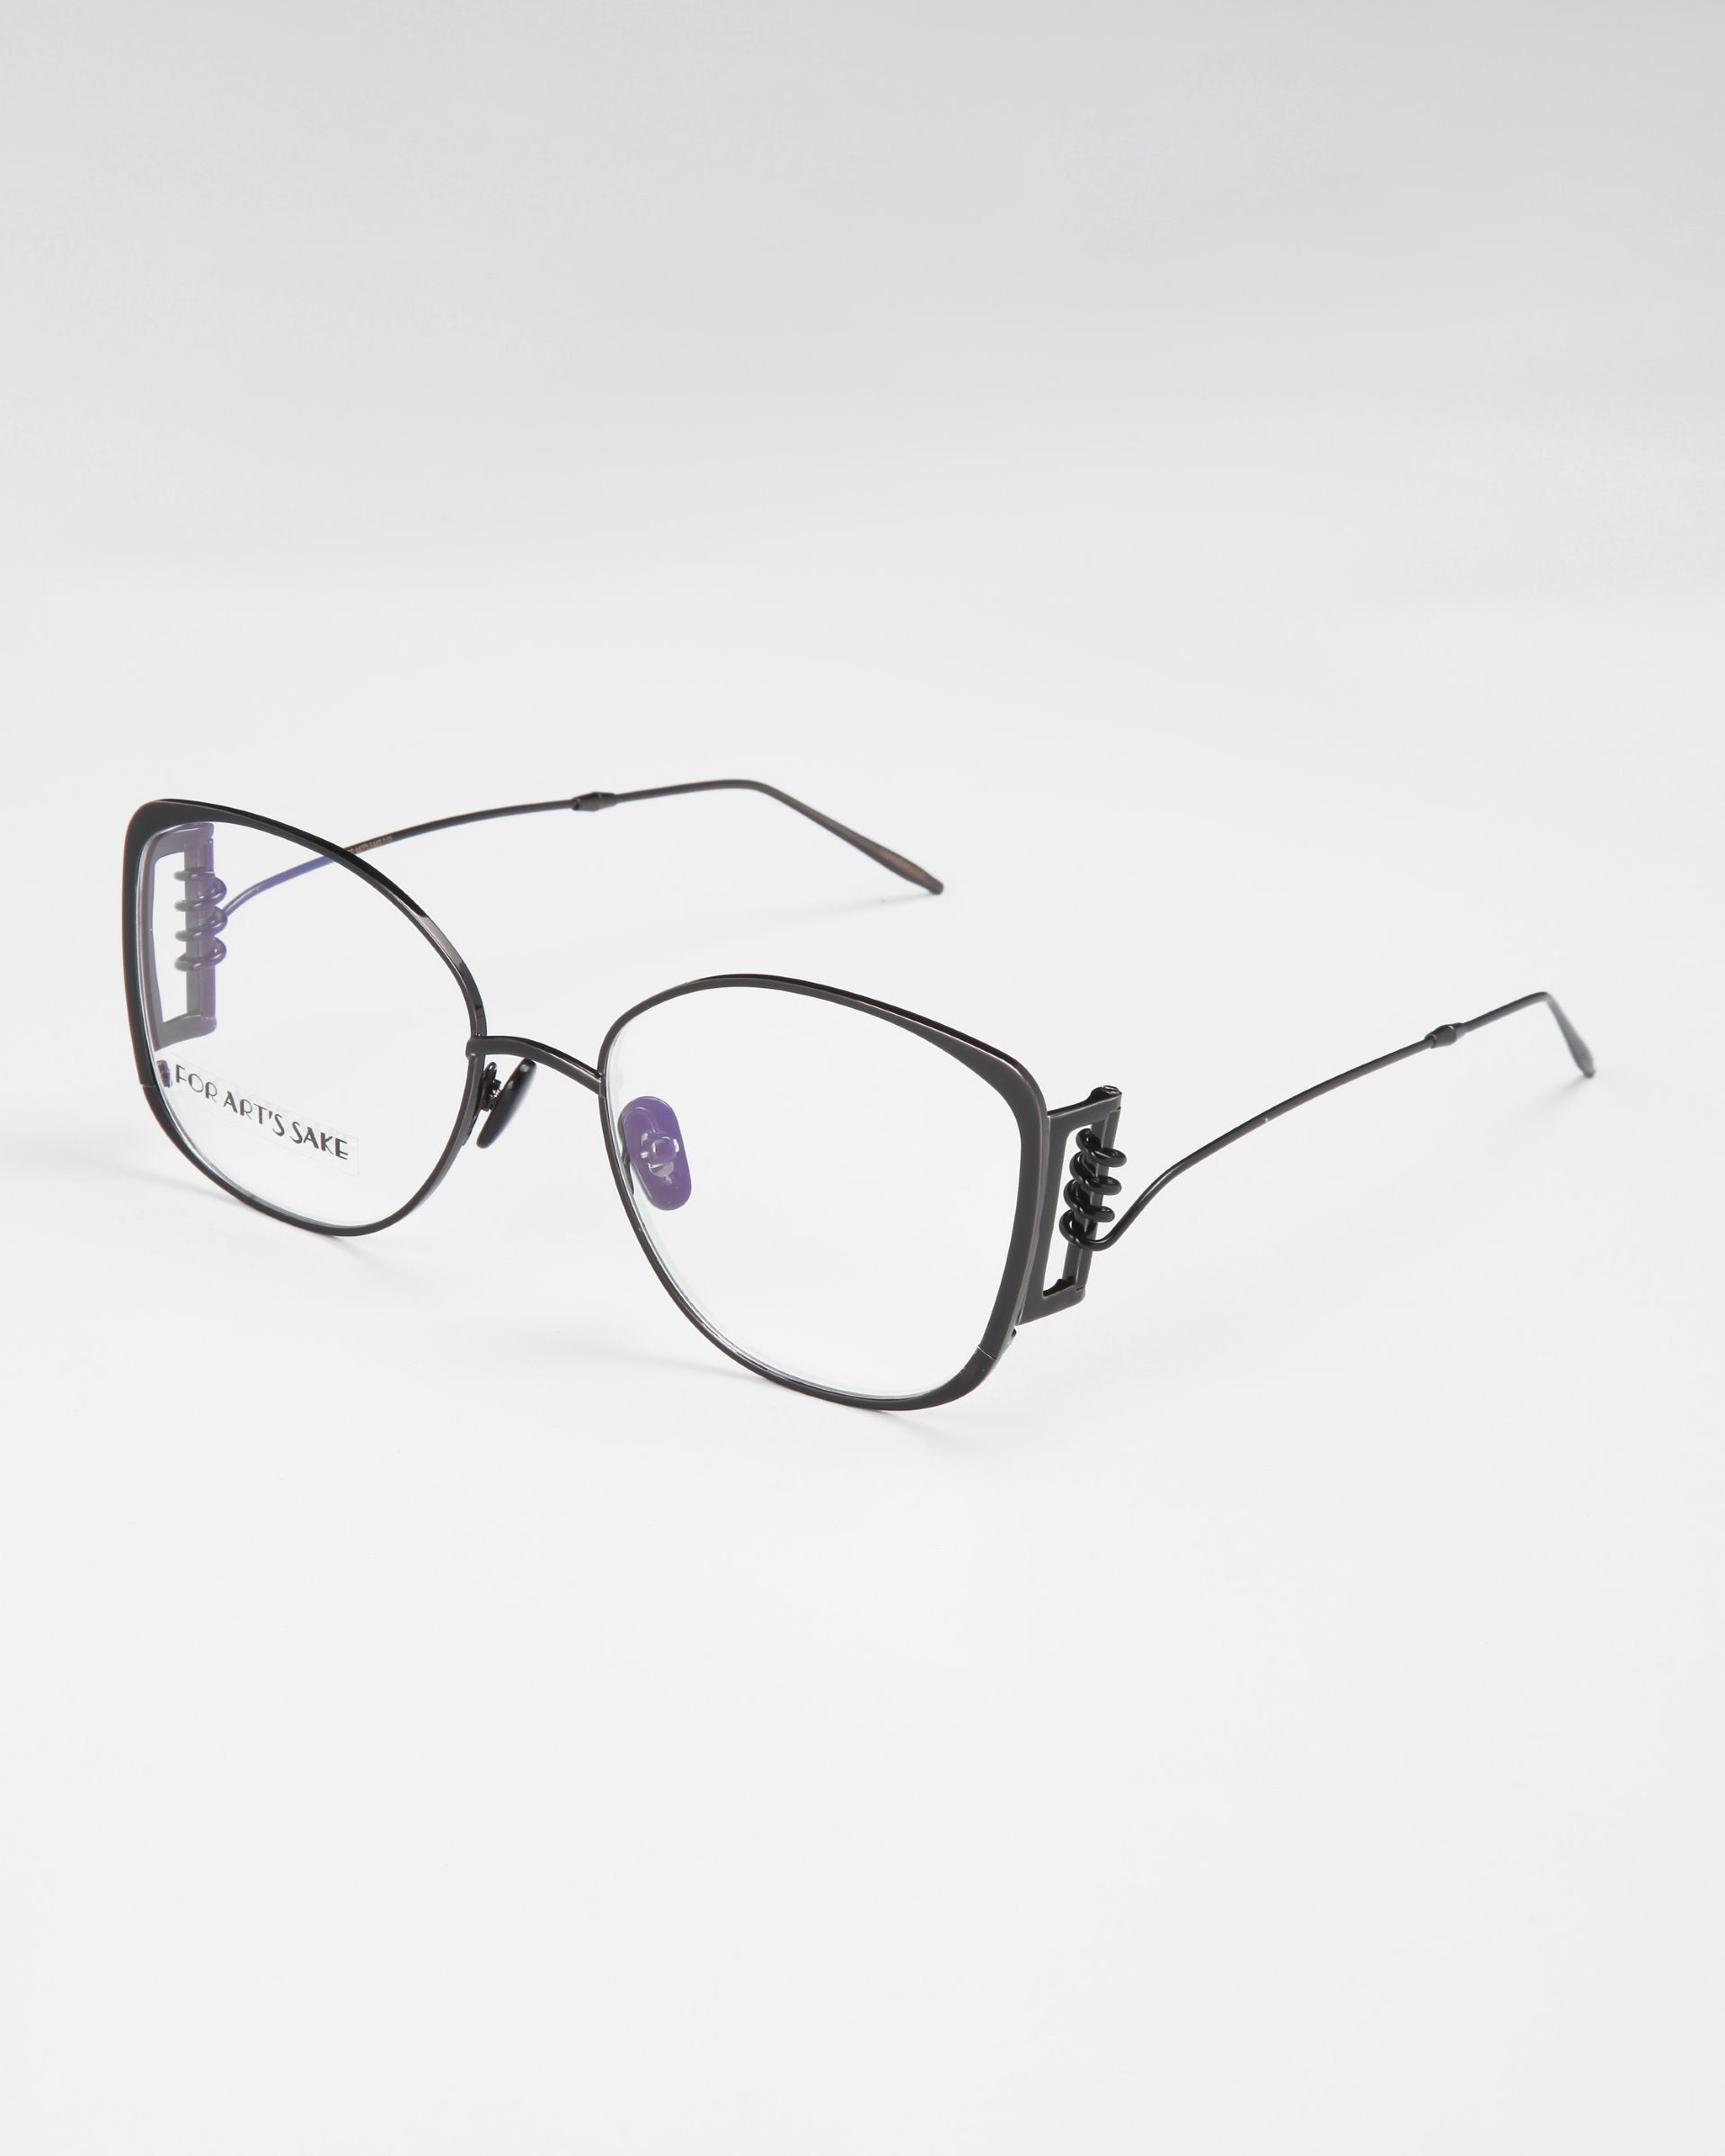 A pair of For Art's Sake® Jupiter black metal eyeglasses with large square lenses sits on a white surface. The frame has thin arms and a slight double bridge design with a small decorative element near the hinges. Featuring blue light filters, the lenses are clear, and the overall design is minimalistic yet stylish.